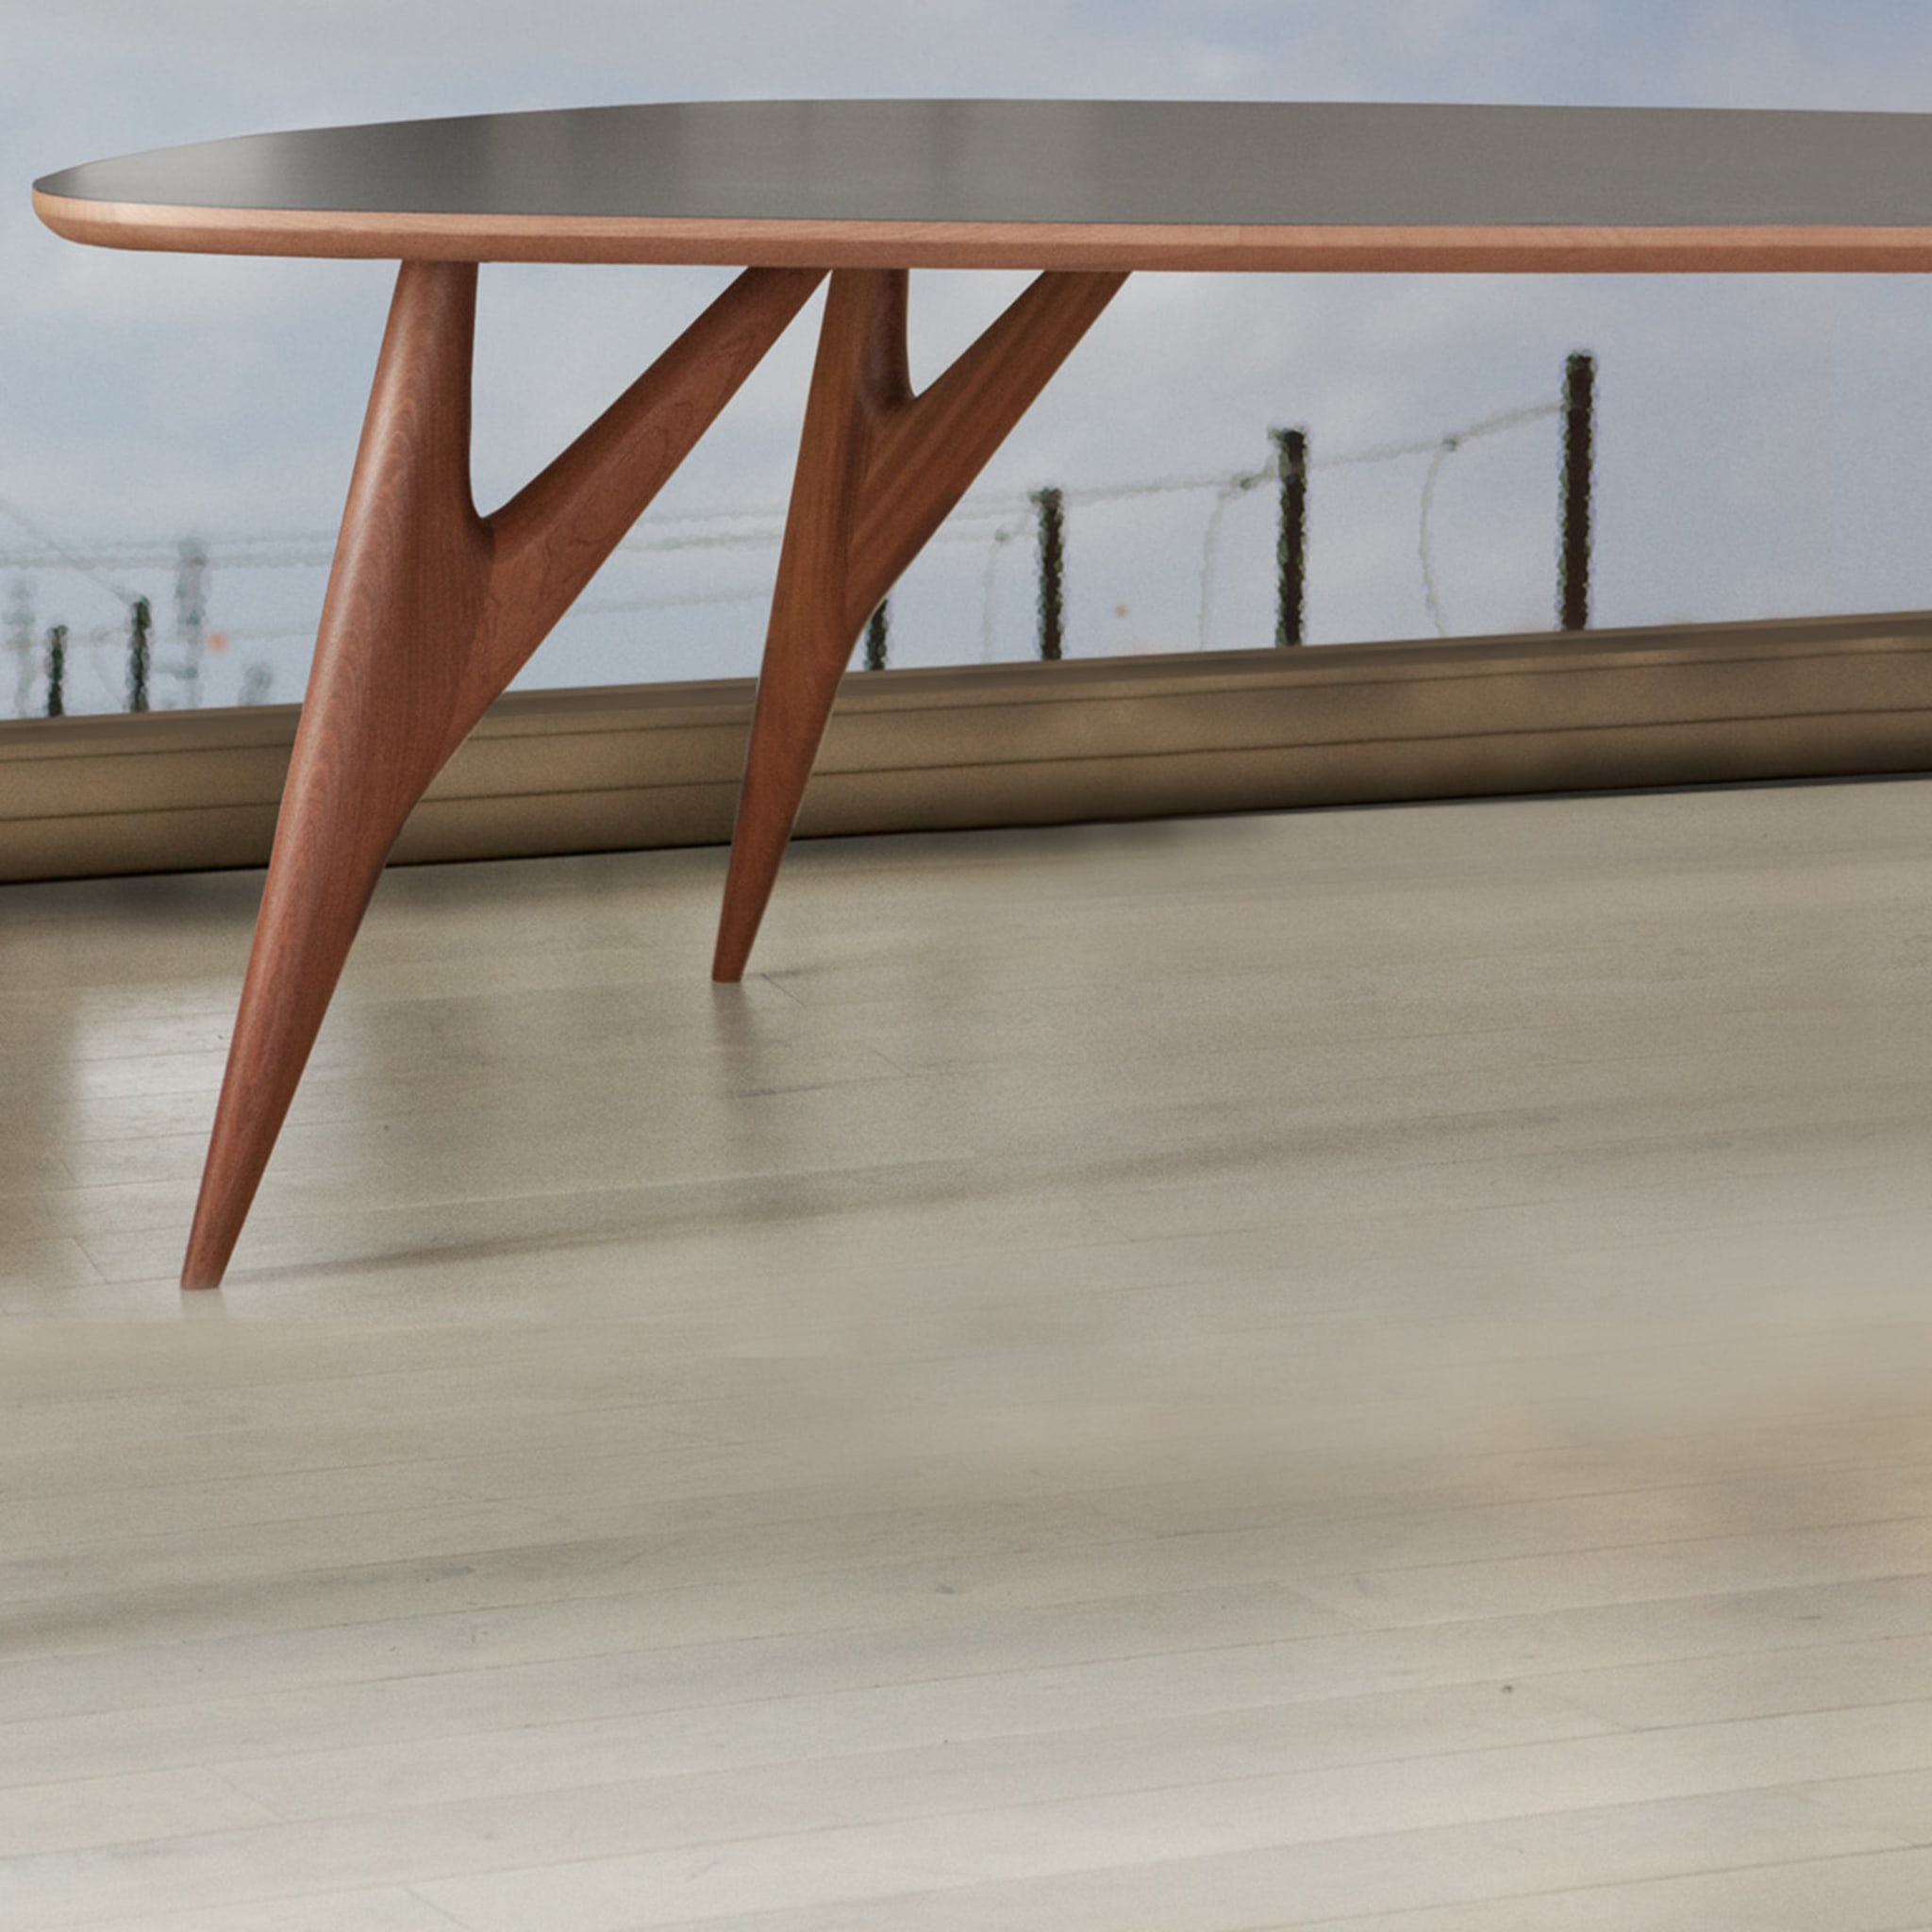 Ted One Gray Dining Table - Alternative view 4